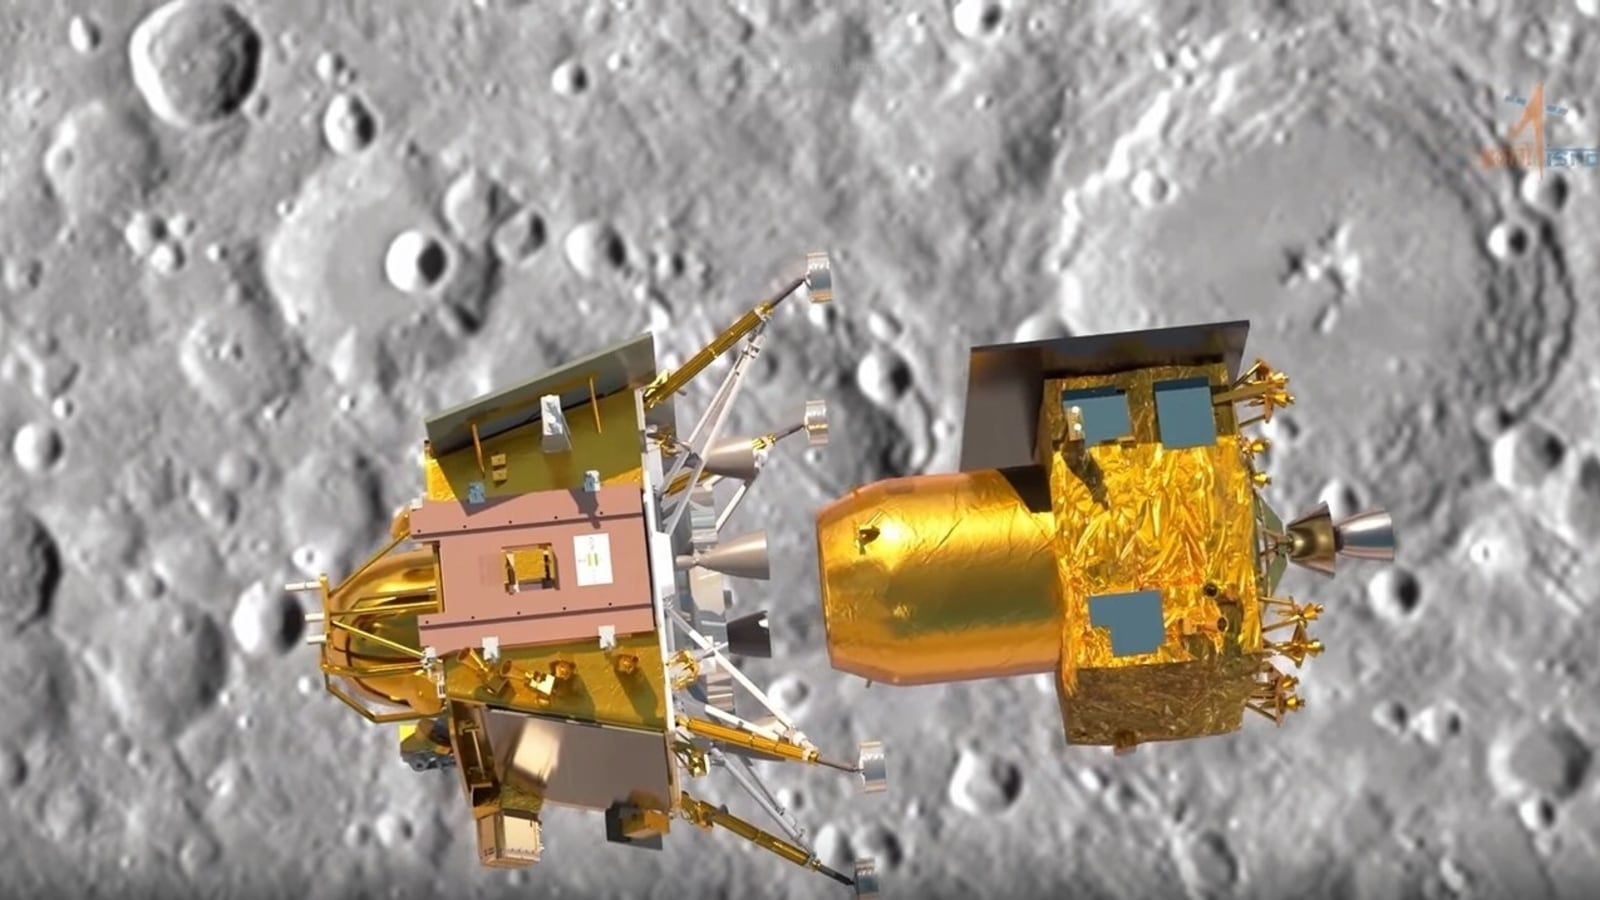 Chandrayaan-3: Tech involved in India’s historic lunar mission